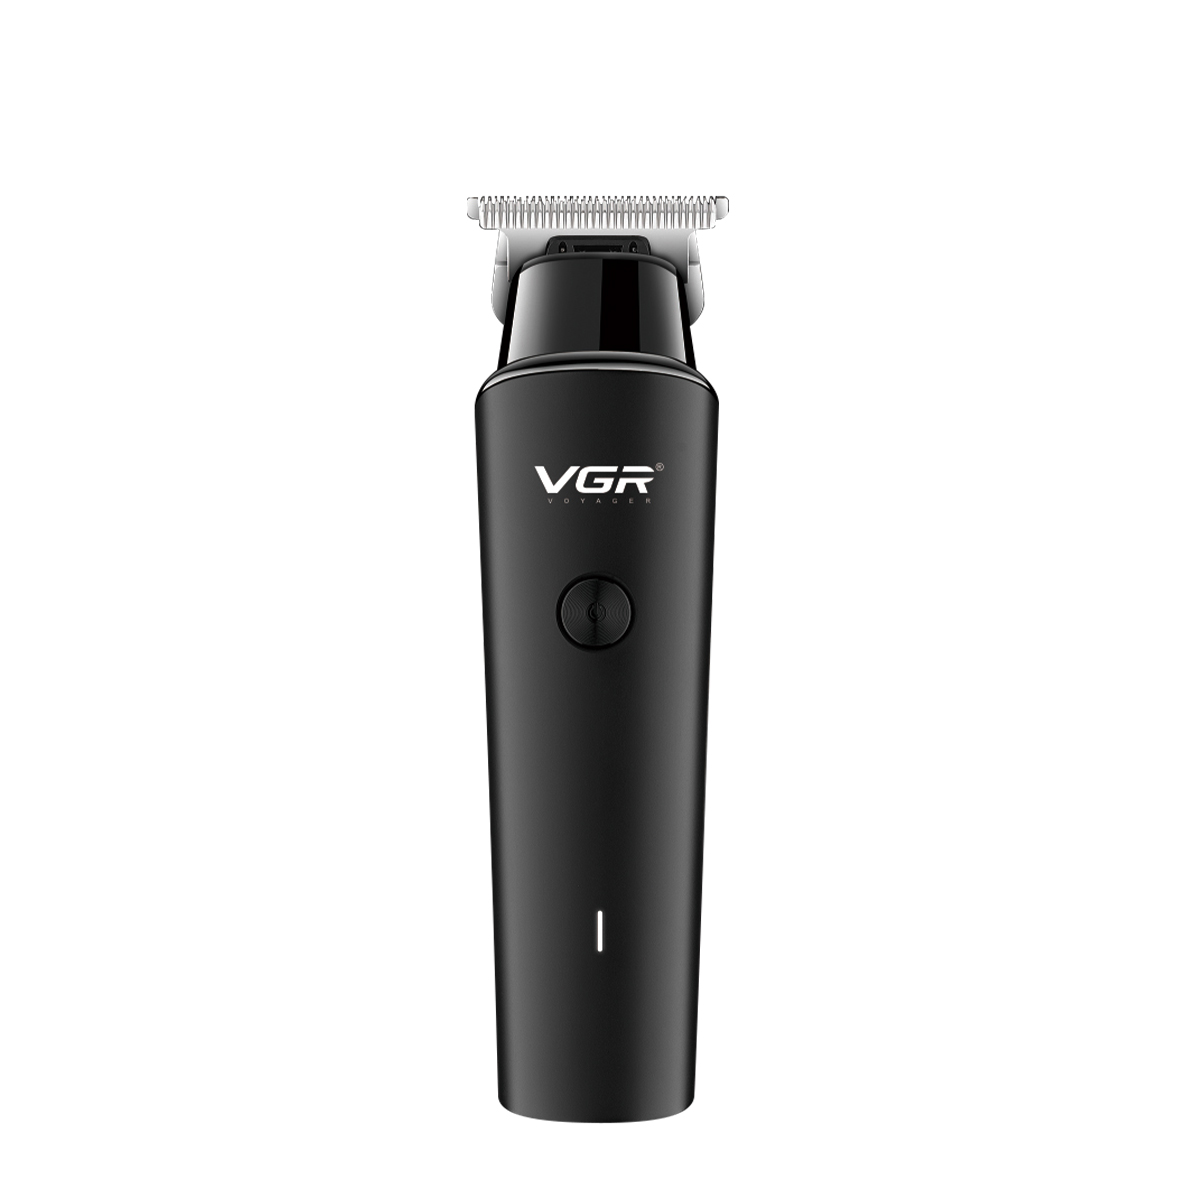 electric beard trimmer factory, USB Electric Beard Trimmer supplier, Wholesale Electric Beard Shaver